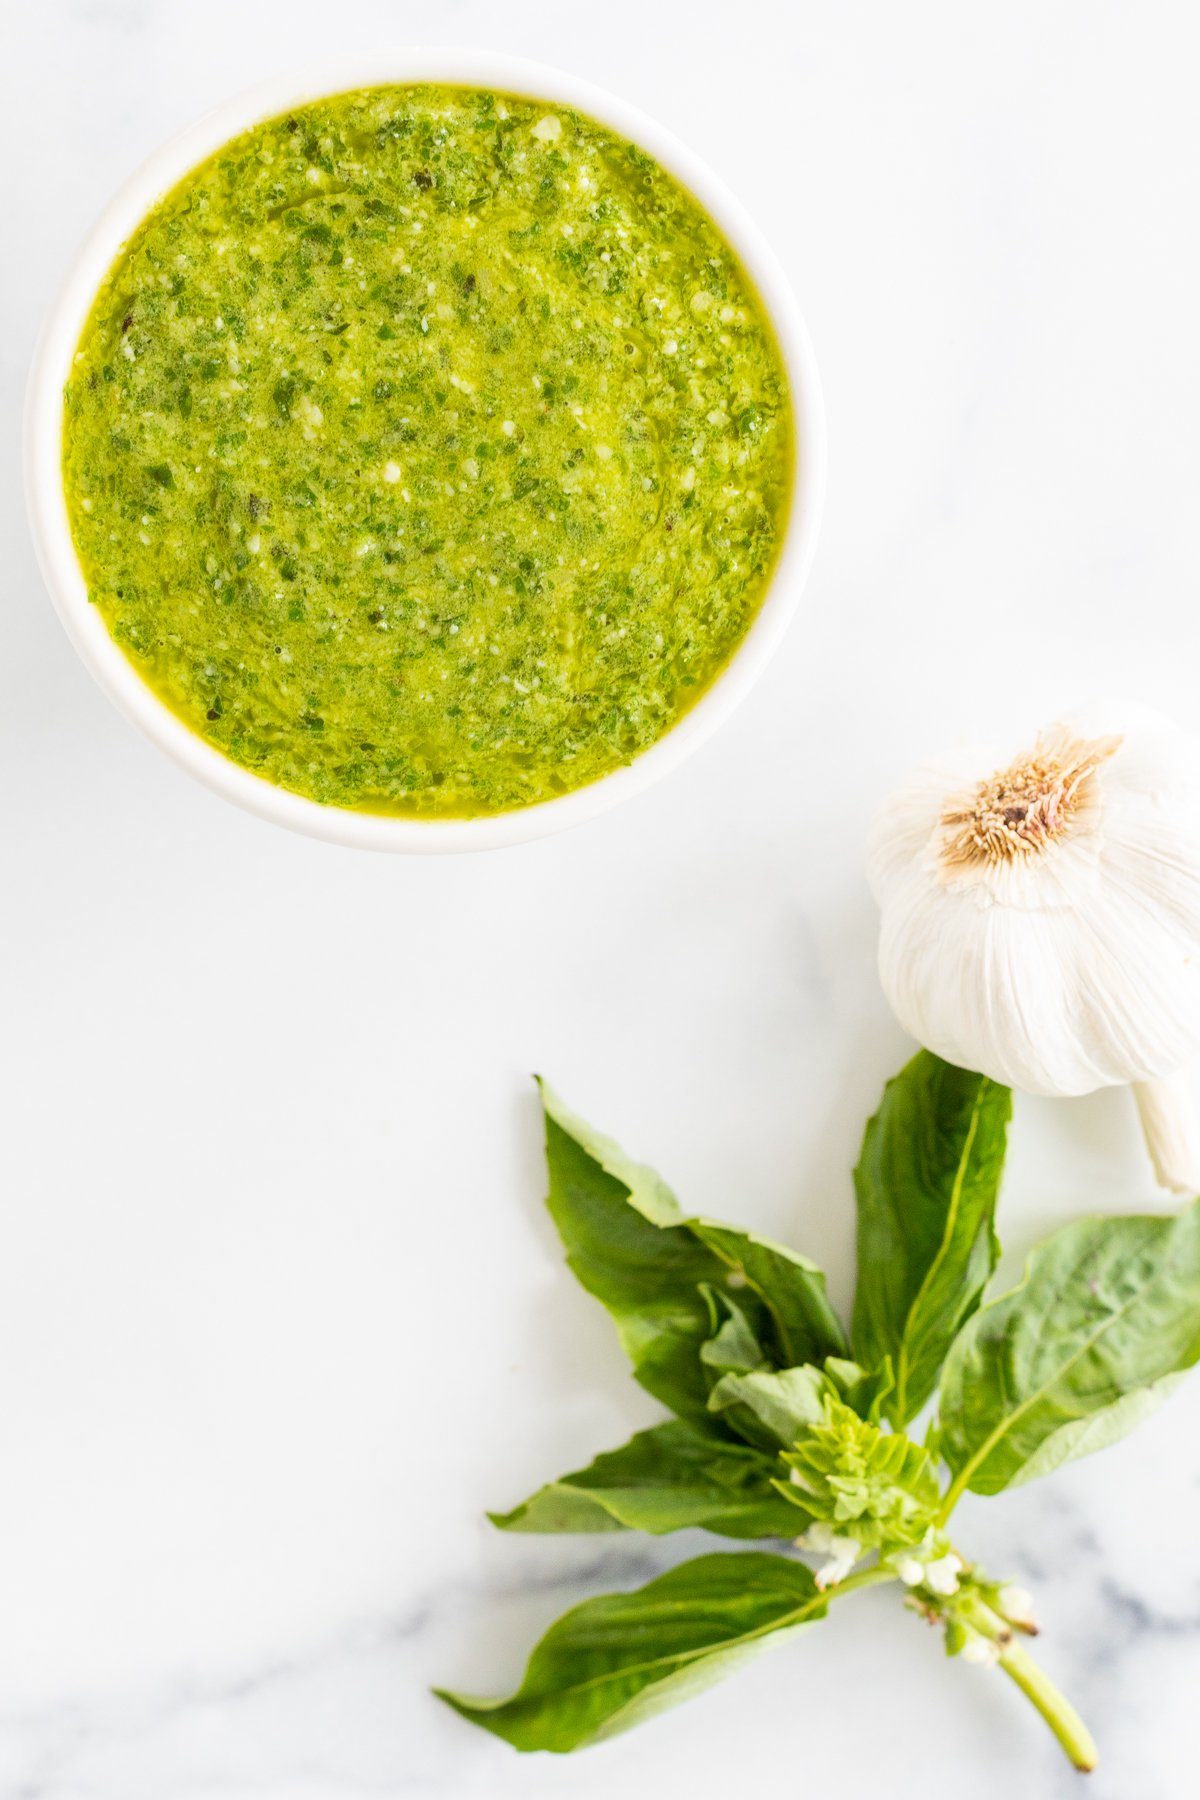 A bowl of nut-free pesto sauce with garlic and basil.